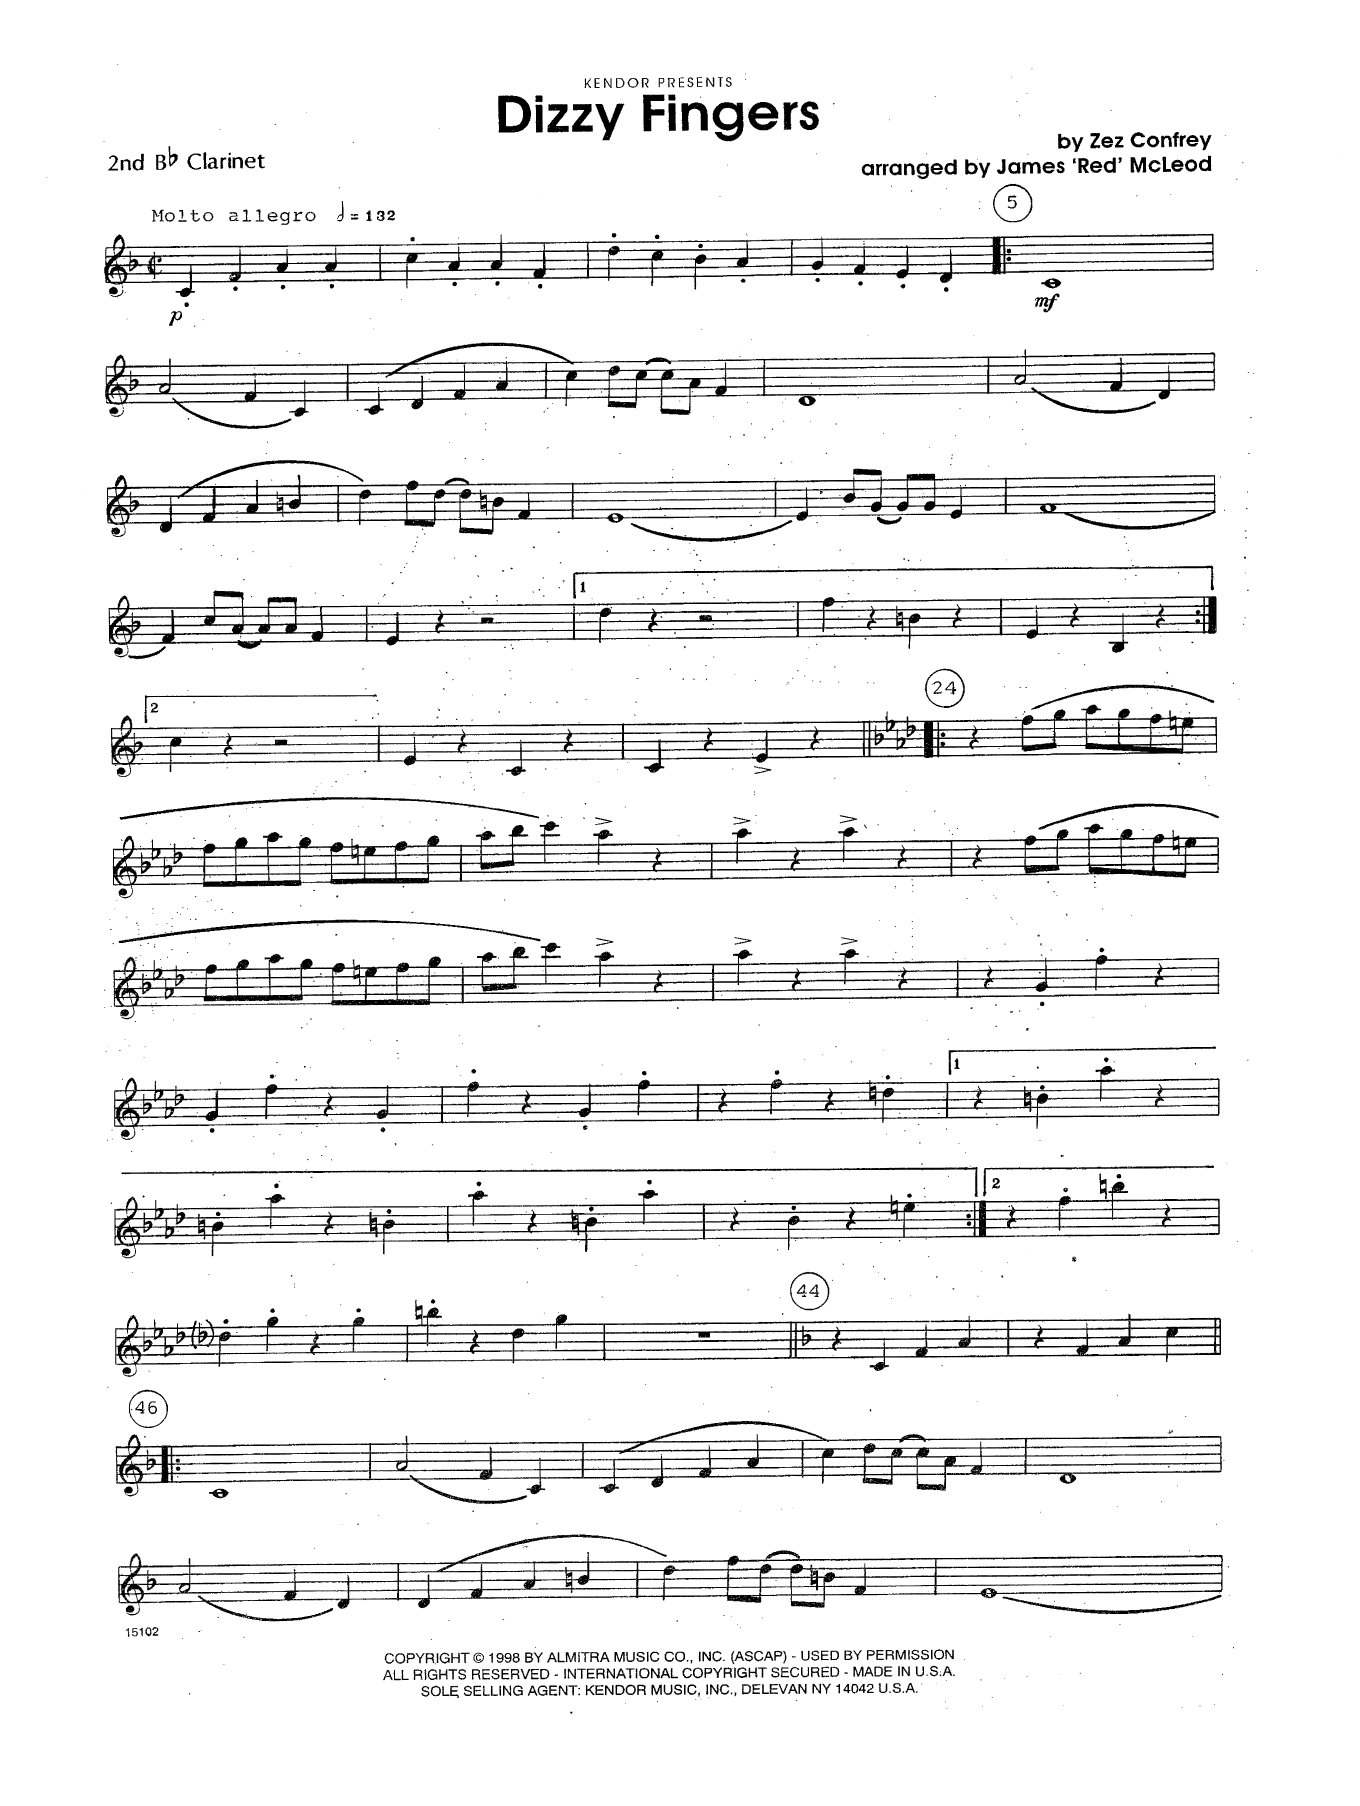 Download James 'Red' McLeod Dizzy Fingers - 2nd Bb Clarinet Sheet Music